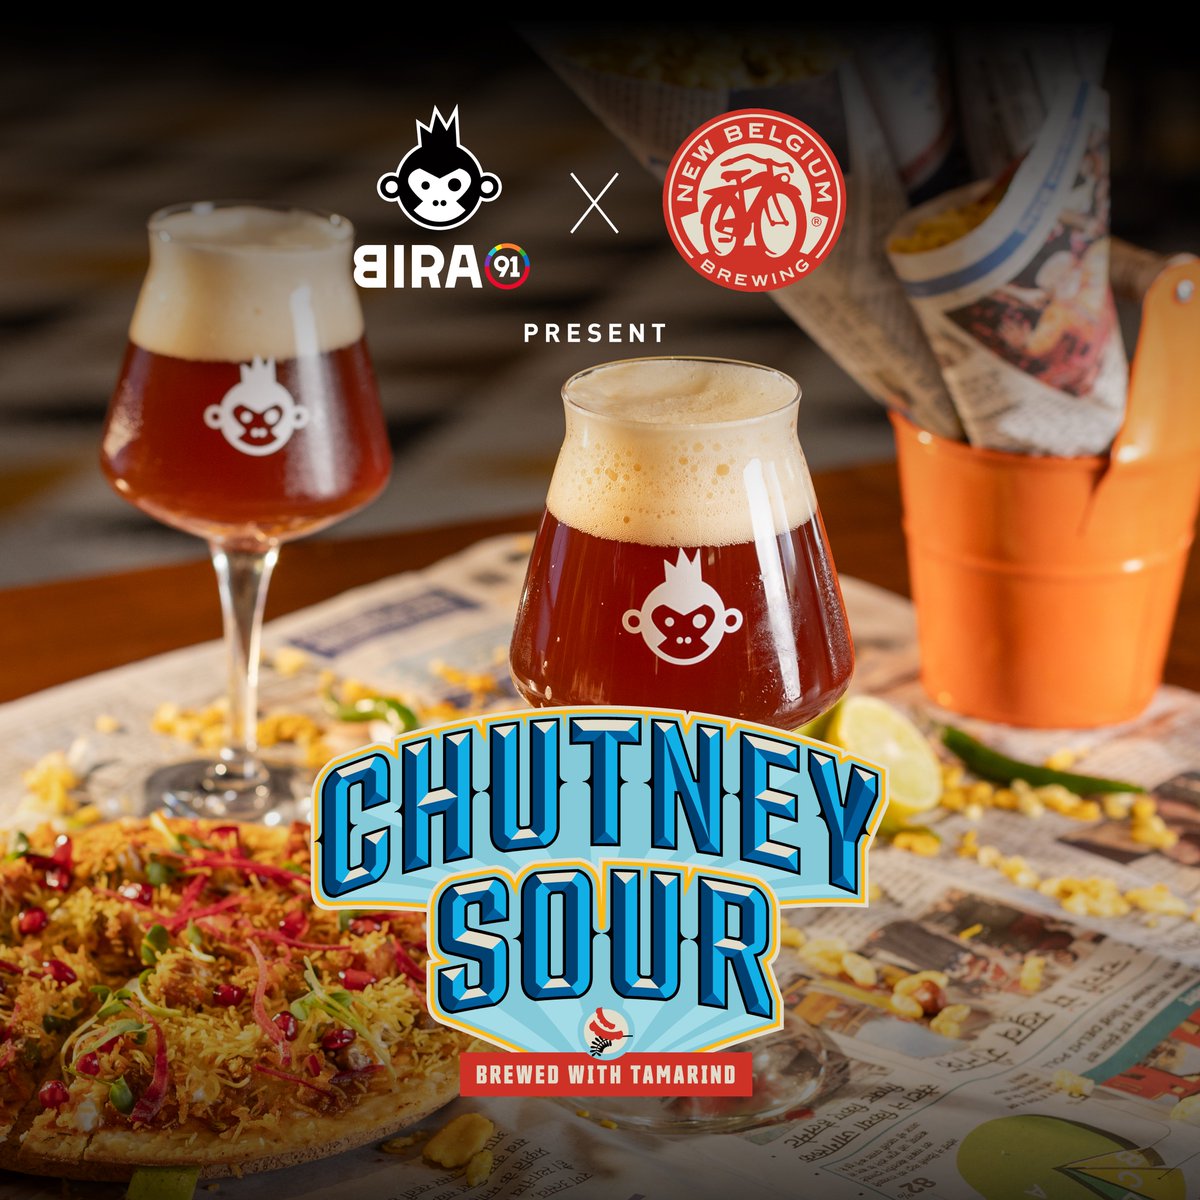 Introducing the Chutney Sour, a limited-edition sour ale that explodes with the vibrant soul of Indian street food. We took the classic Belgian-style Dubbel, @newbelgium’s specialty, and infused it with tangy tamarind, the heart of any good chutney.